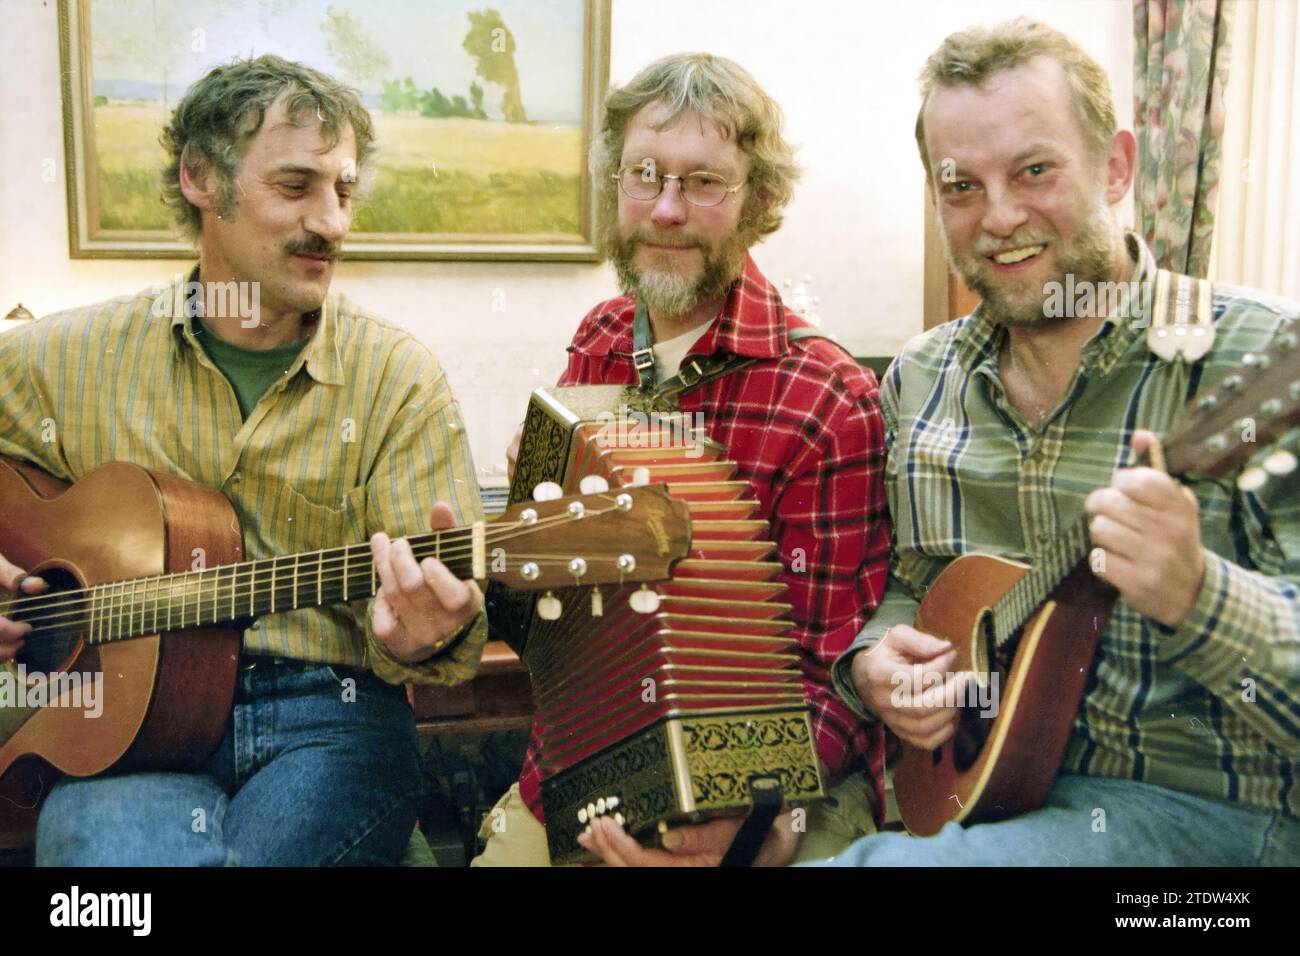 Folk trio Whetstone, Velserbroek, 22-02-1998, Whizgle News from the Past, Tailored for the Future. Explore historical narratives, Dutch The Netherlands agency image with a modern perspective, bridging the gap between yesterday's events and tomorrow's insights. A timeless journey shaping the stories that shape our future Stock Photo